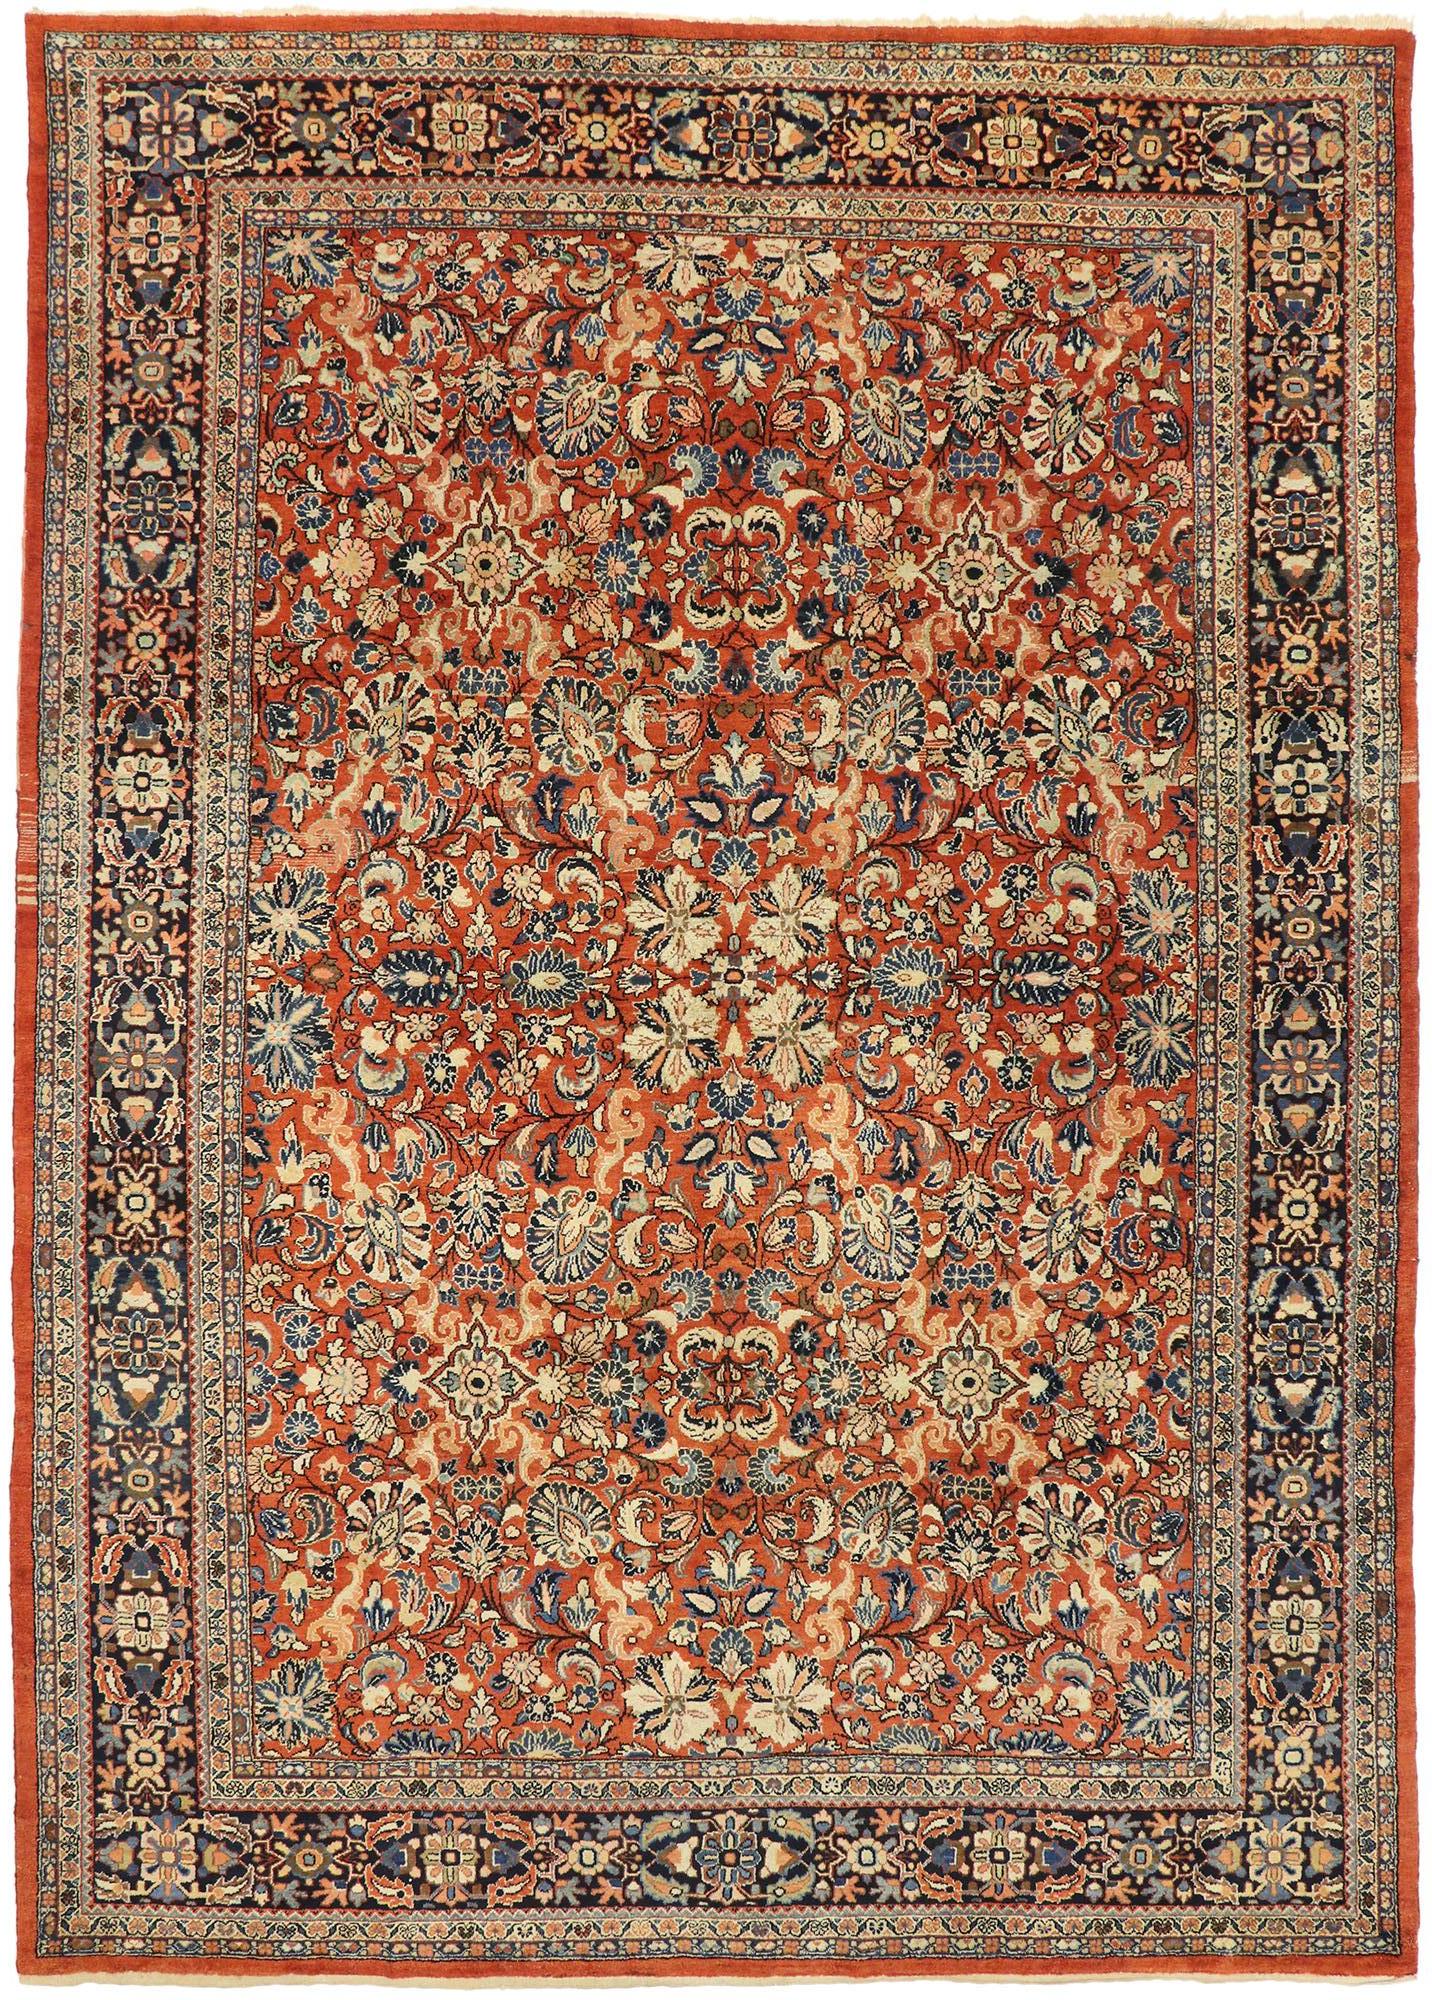 76710 Antique Persian Mahal Rug with Traditional Federal and American Colonial Style 10'02 x 14'04. Balancing traditional sensibility with a timeless floral design, this hand-knotted wool antique Persian Mahal rug beautifully embodies a classic